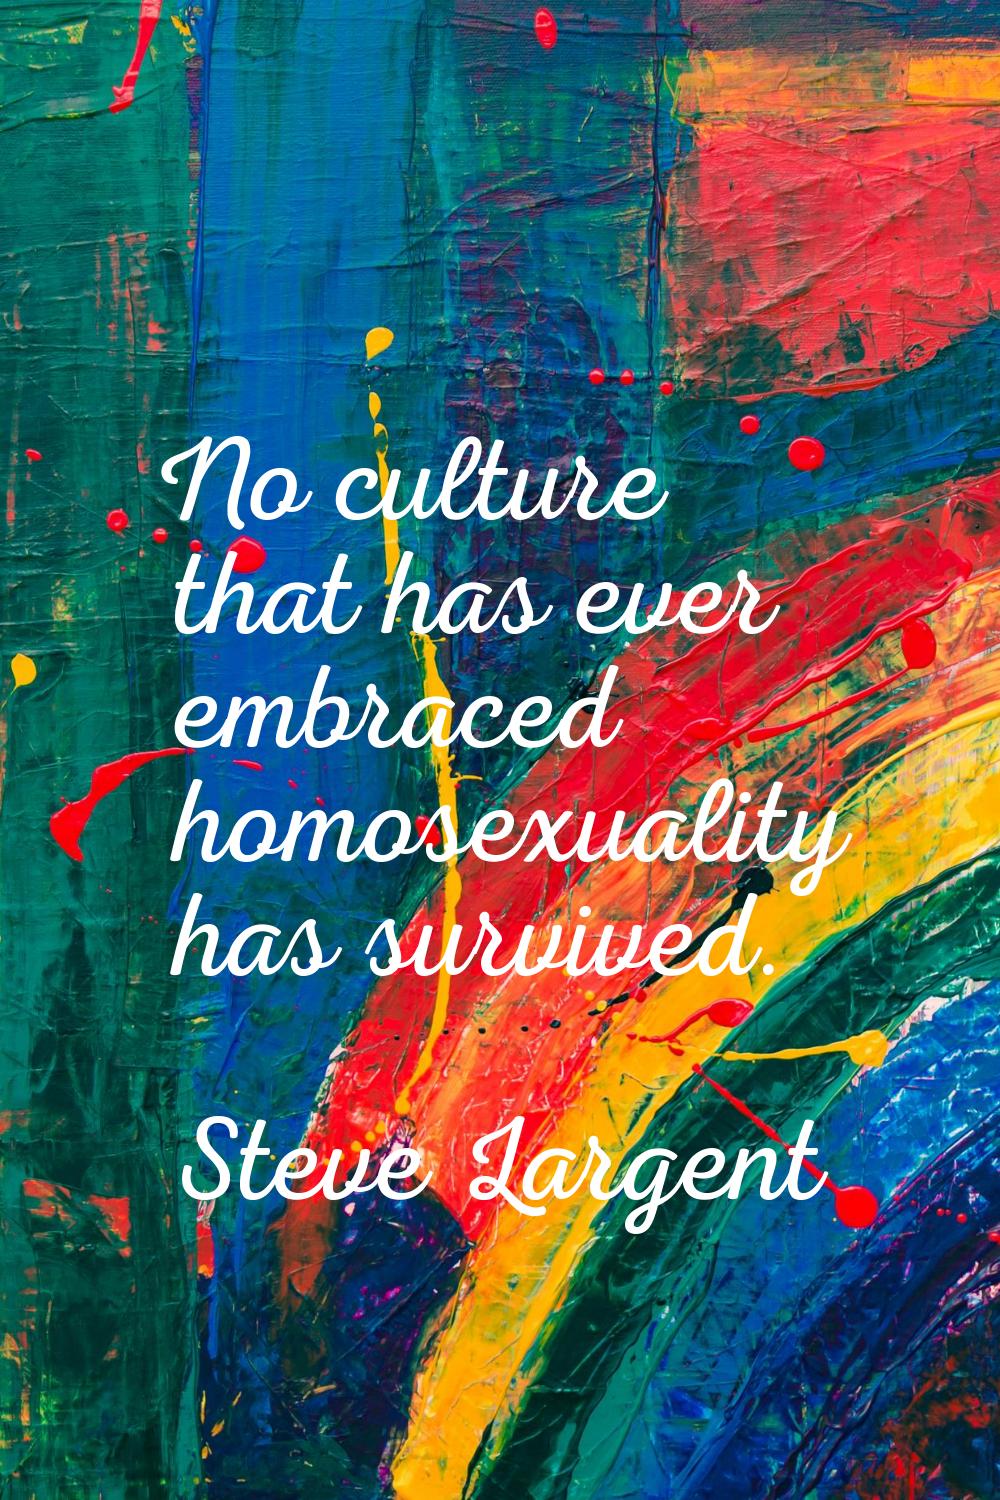 No culture that has ever embraced homosexuality has survived.